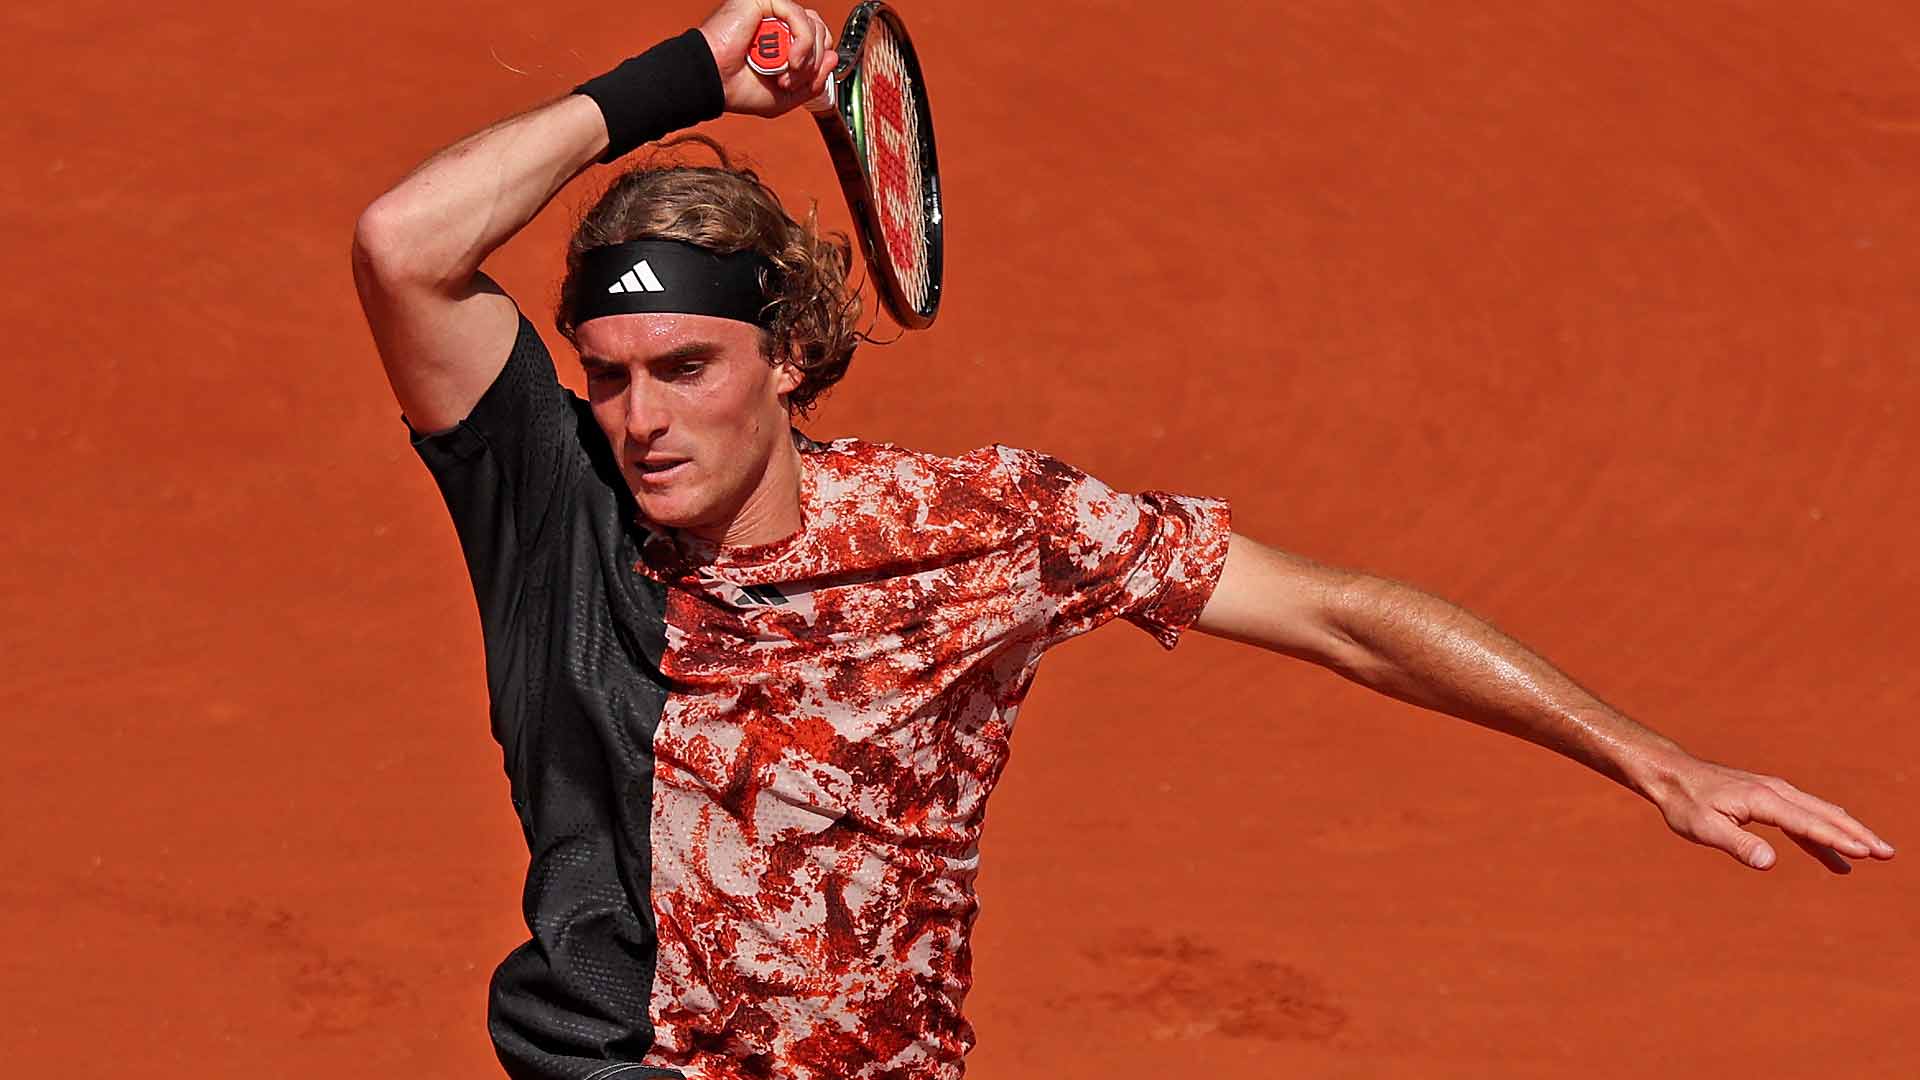 Stefanos Tsitsipas hits 57 winners in a four-set win against Jiri Vesely on Sunday at Roland Garros.